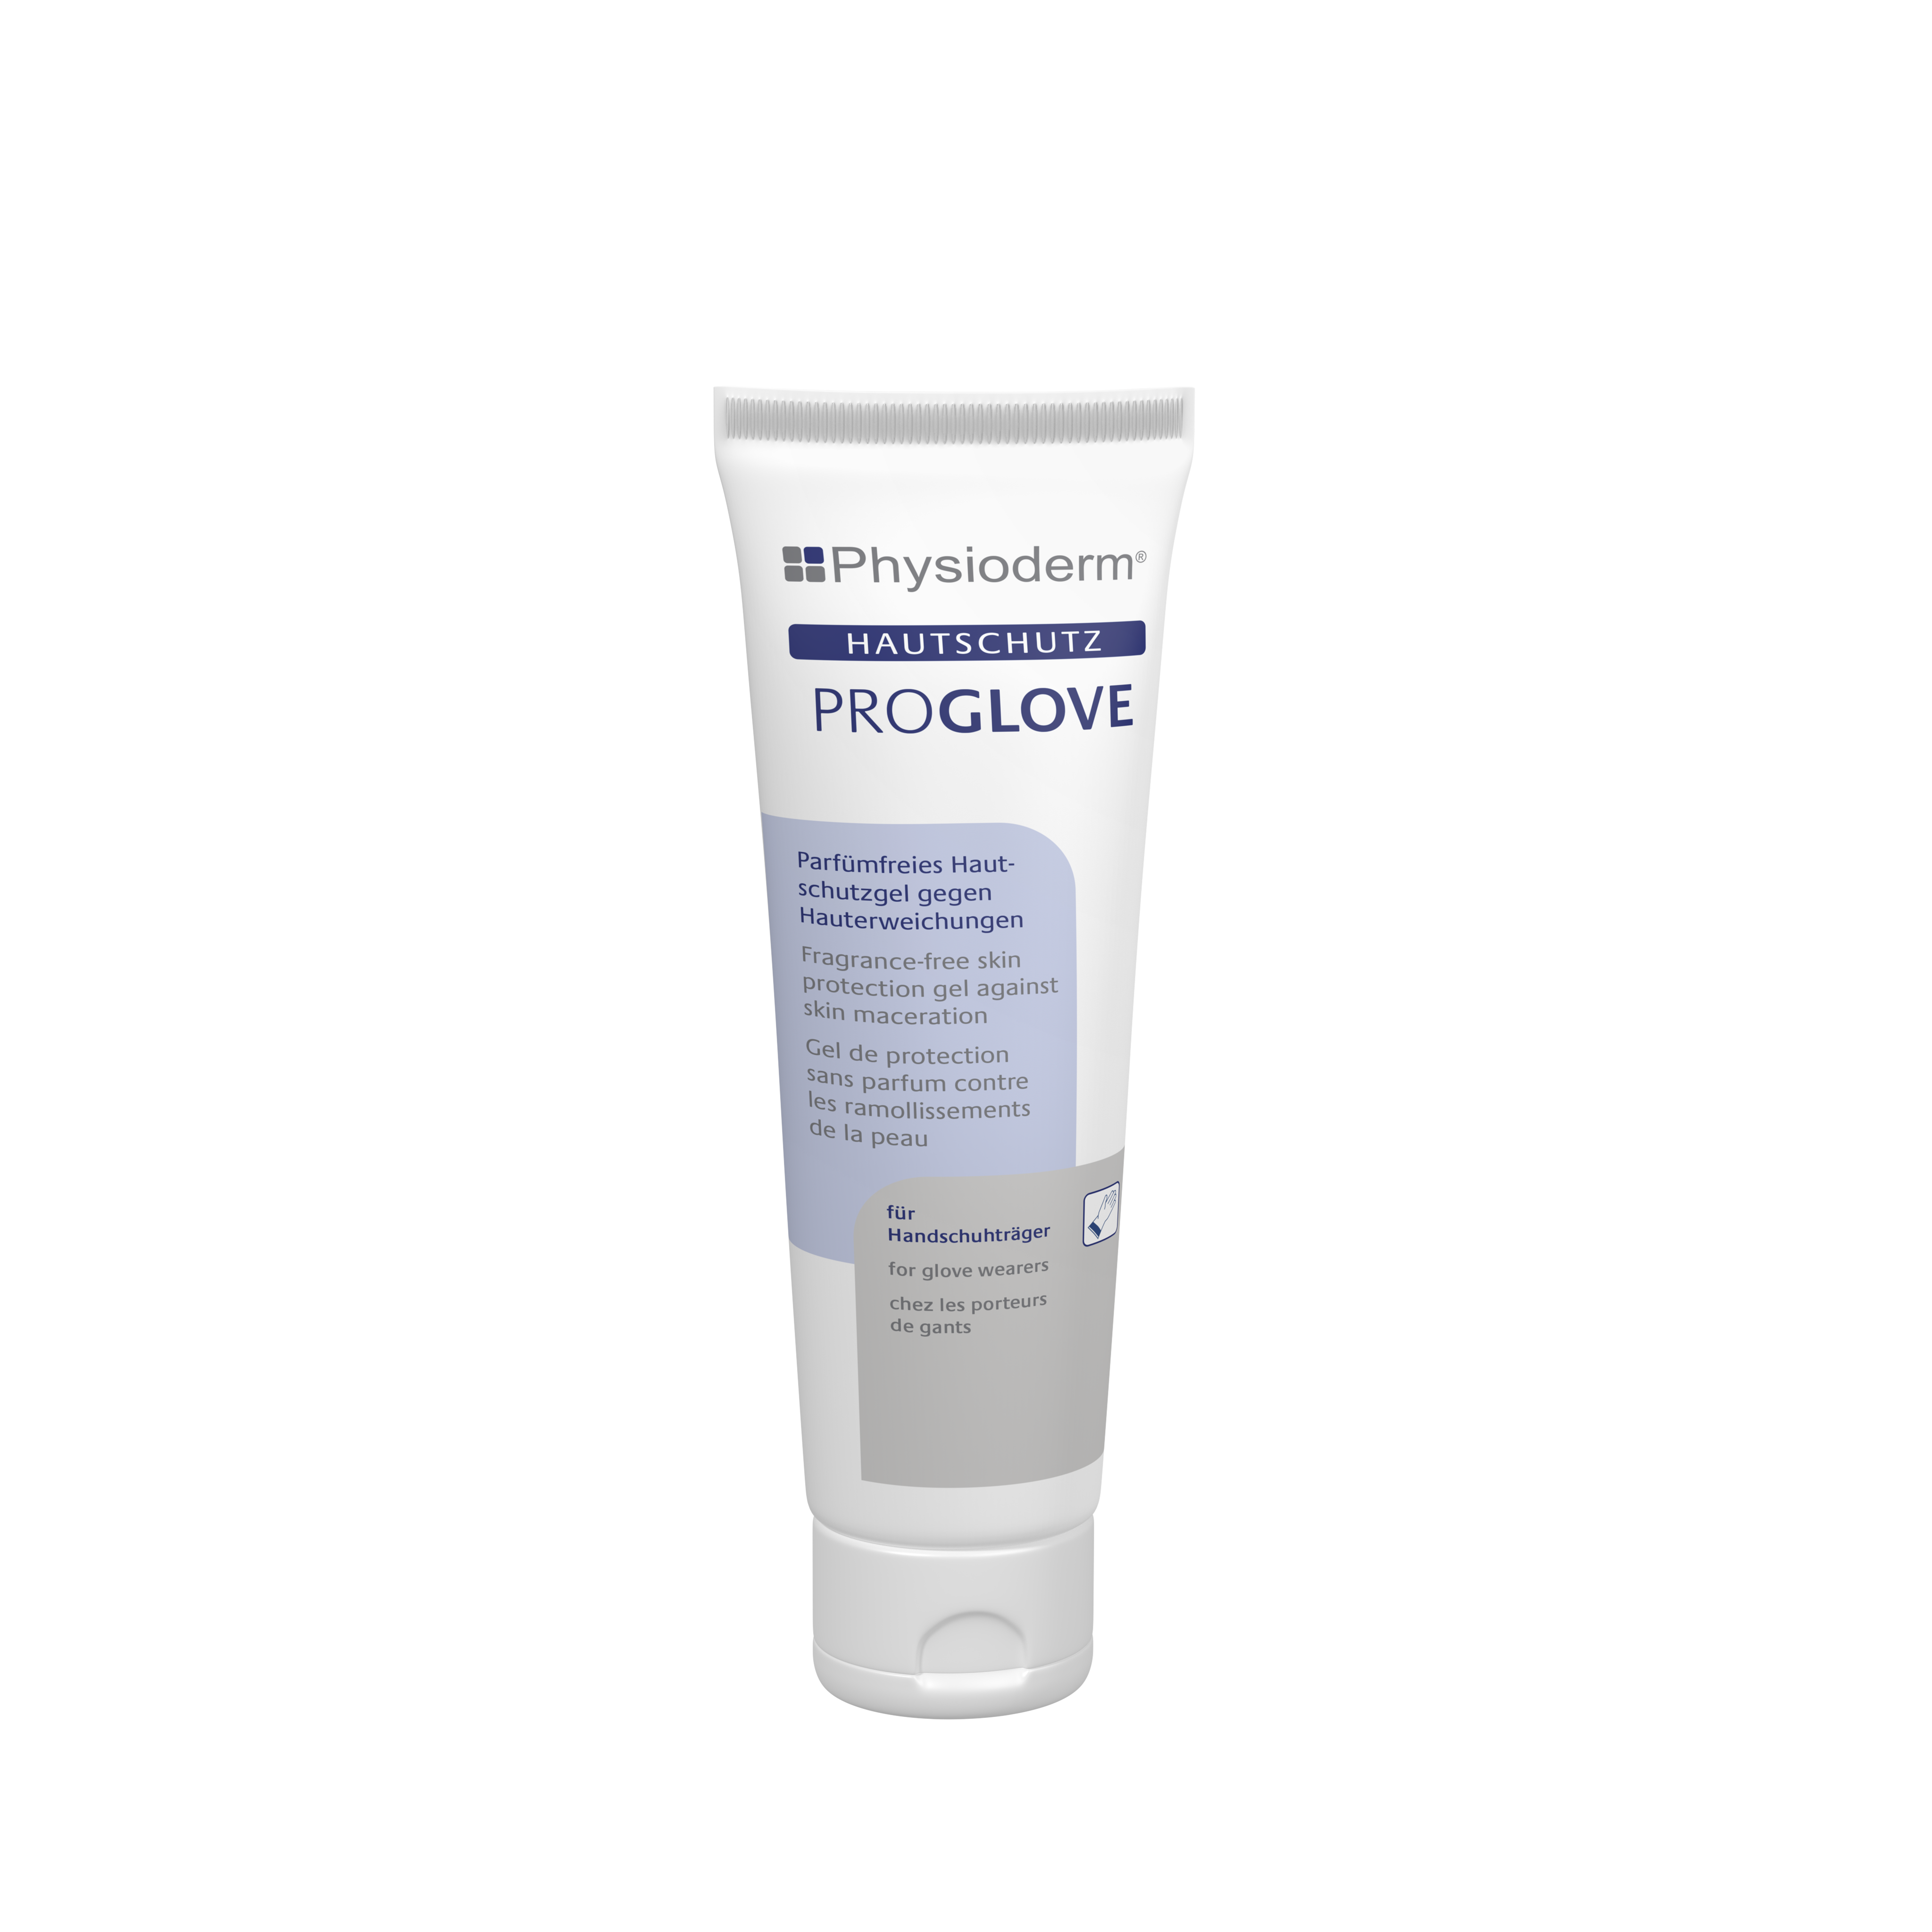  Physioderm Proglove 100ML (Glove Wearers), Silicon free, Without grease, Skin protection gel